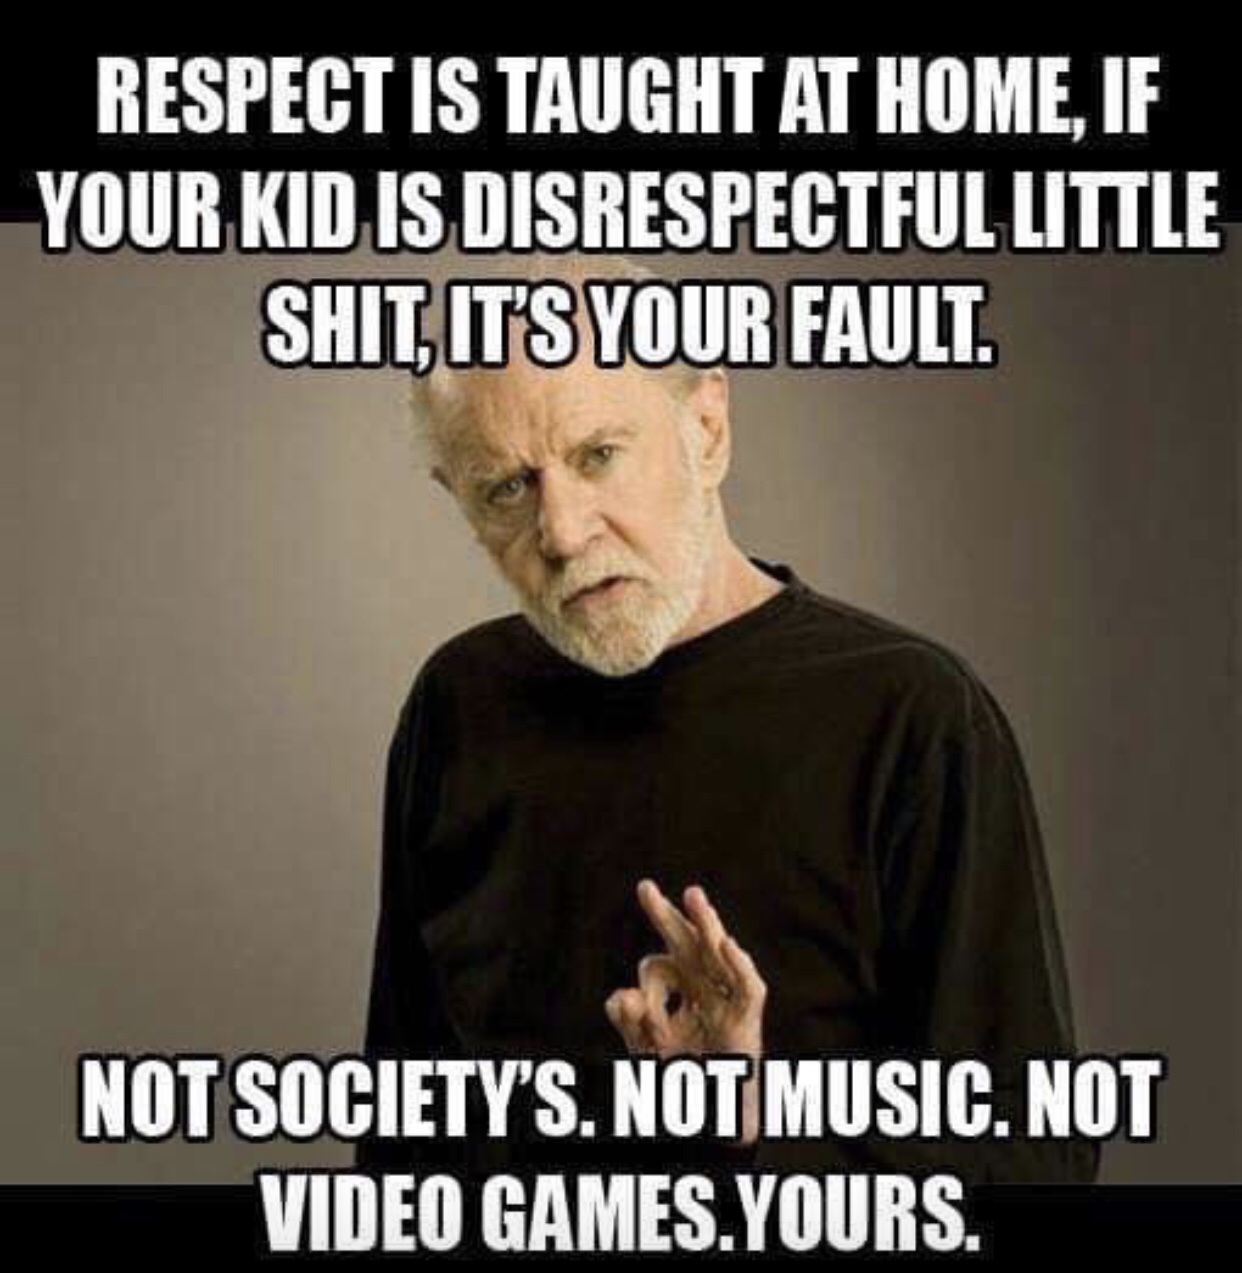 your kids are little shits - Respect Is Taught At Home, If Your Kid Is Disrespectful Little Shit, It'S Your Fault. Not Society'S. Not Music. Not Video Games.Yours